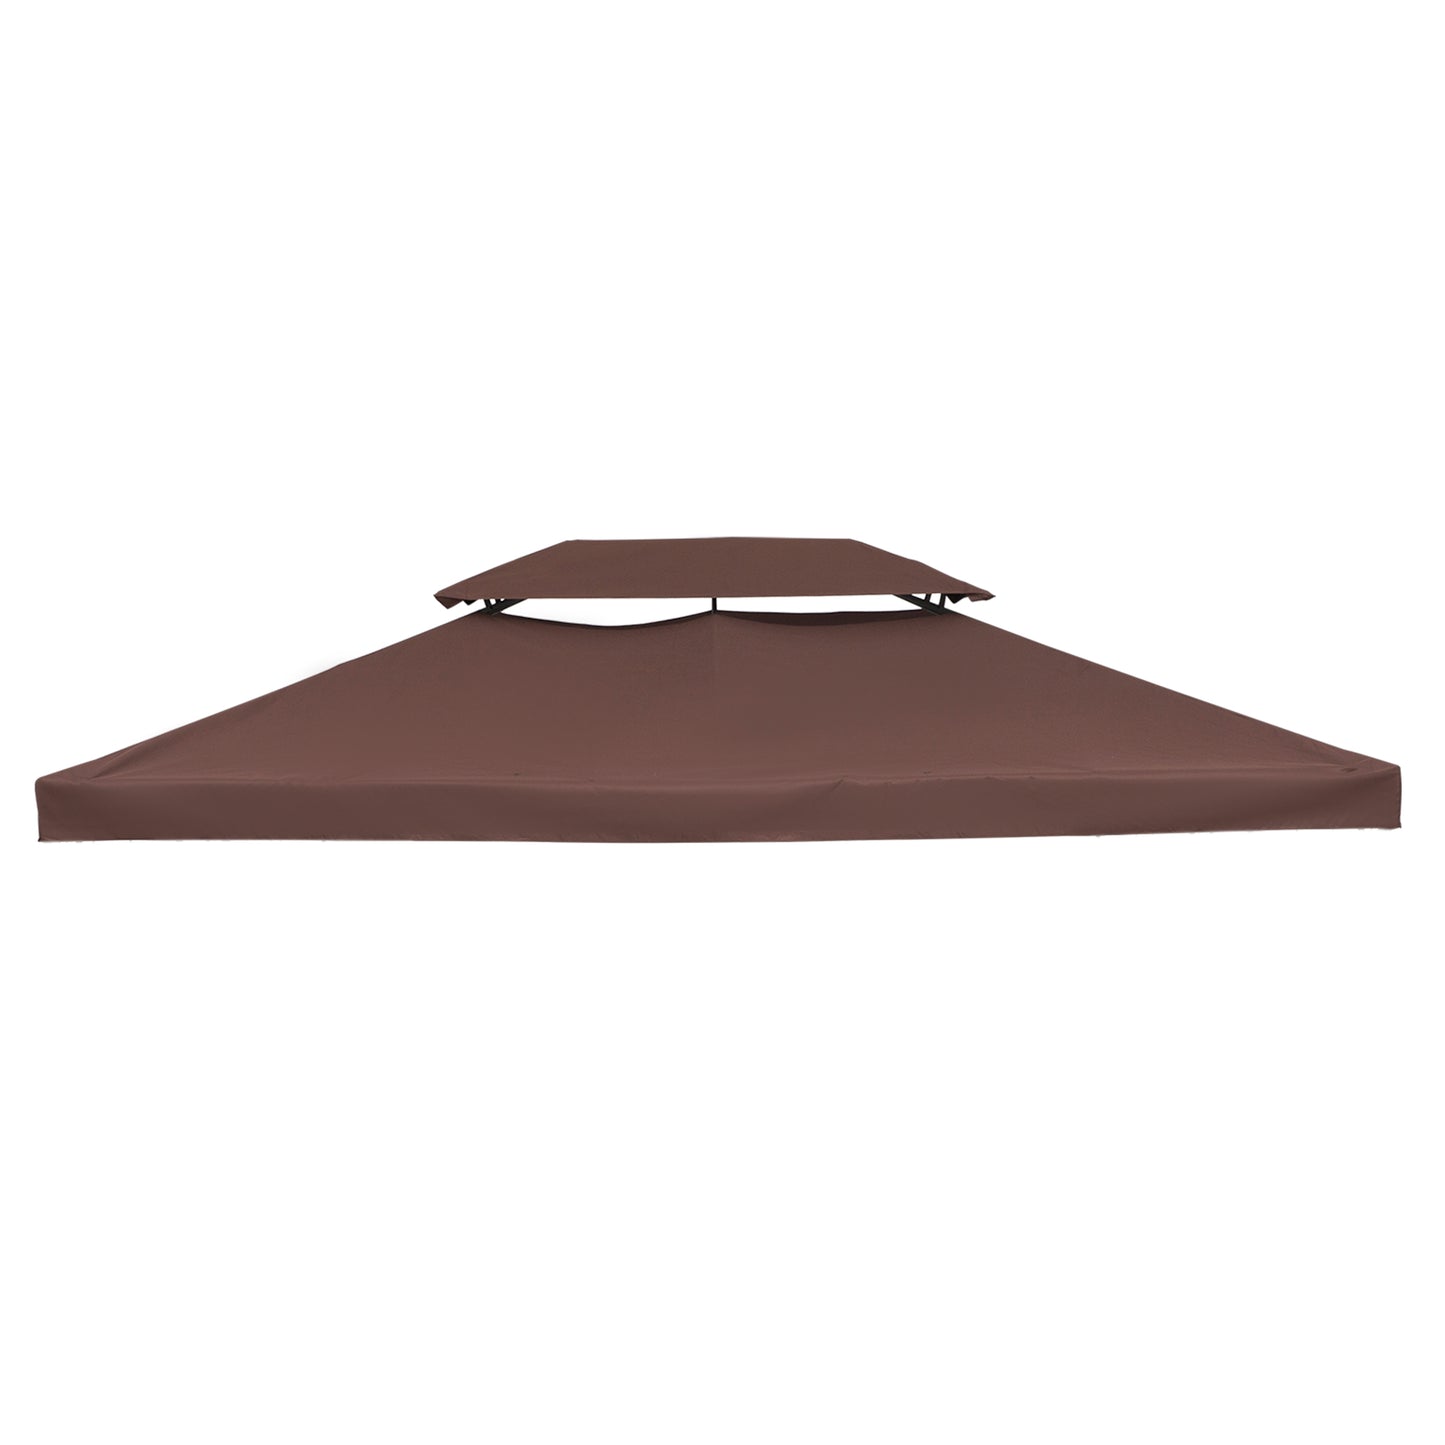 Outsunny Gazebo Replacement Top Cover Tent Roof 2 Tier, size (3m x 4m)-Brown